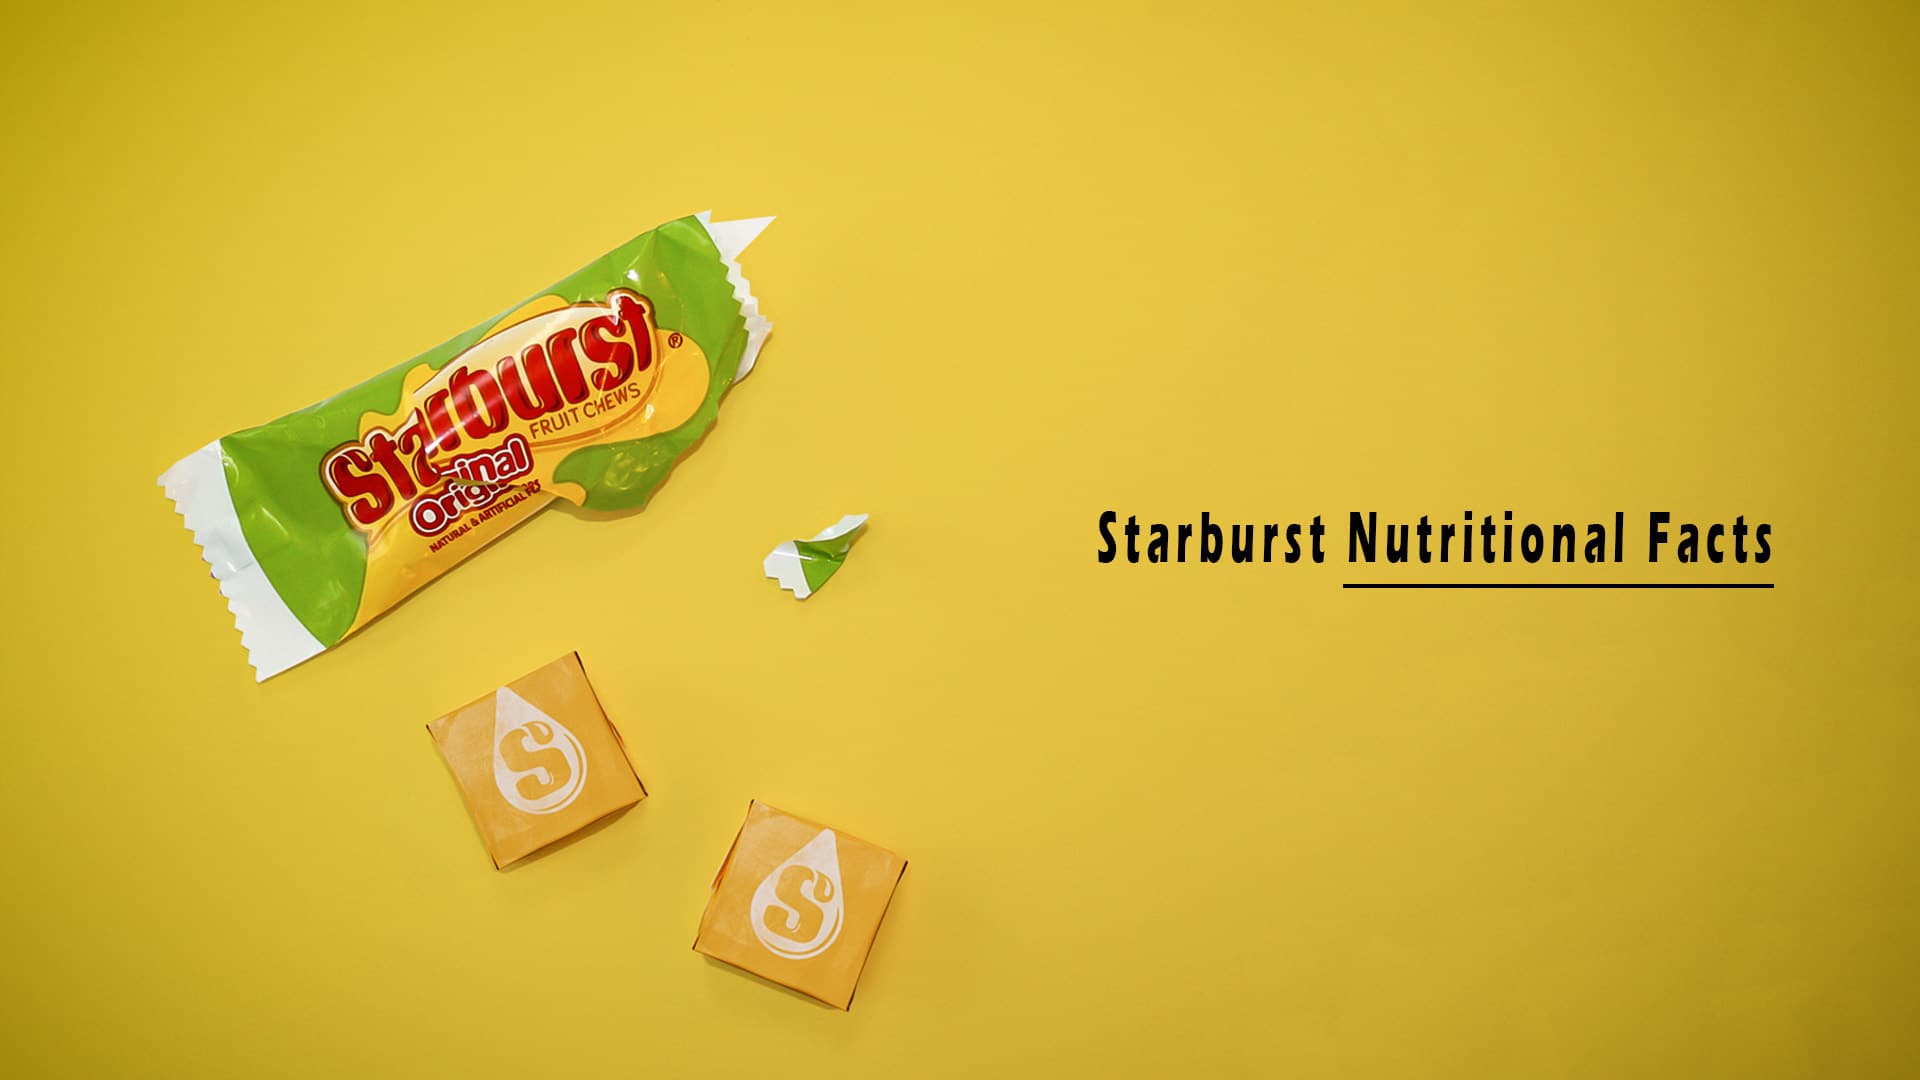 Starburst Nutritional Facts